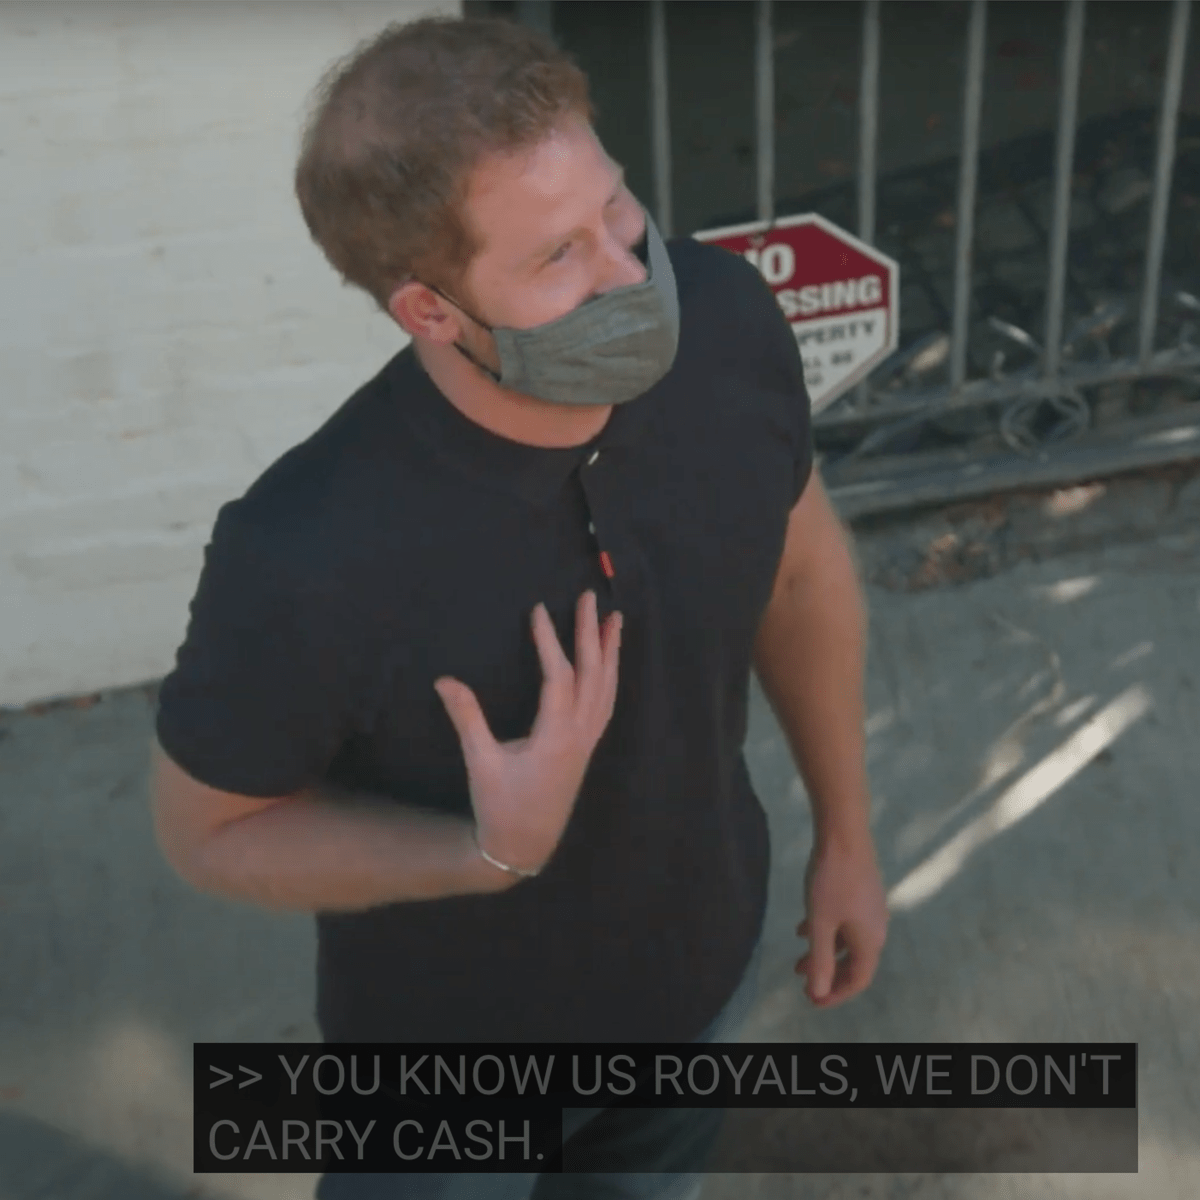 Prince Harry told James Corden that royals don't carry cash